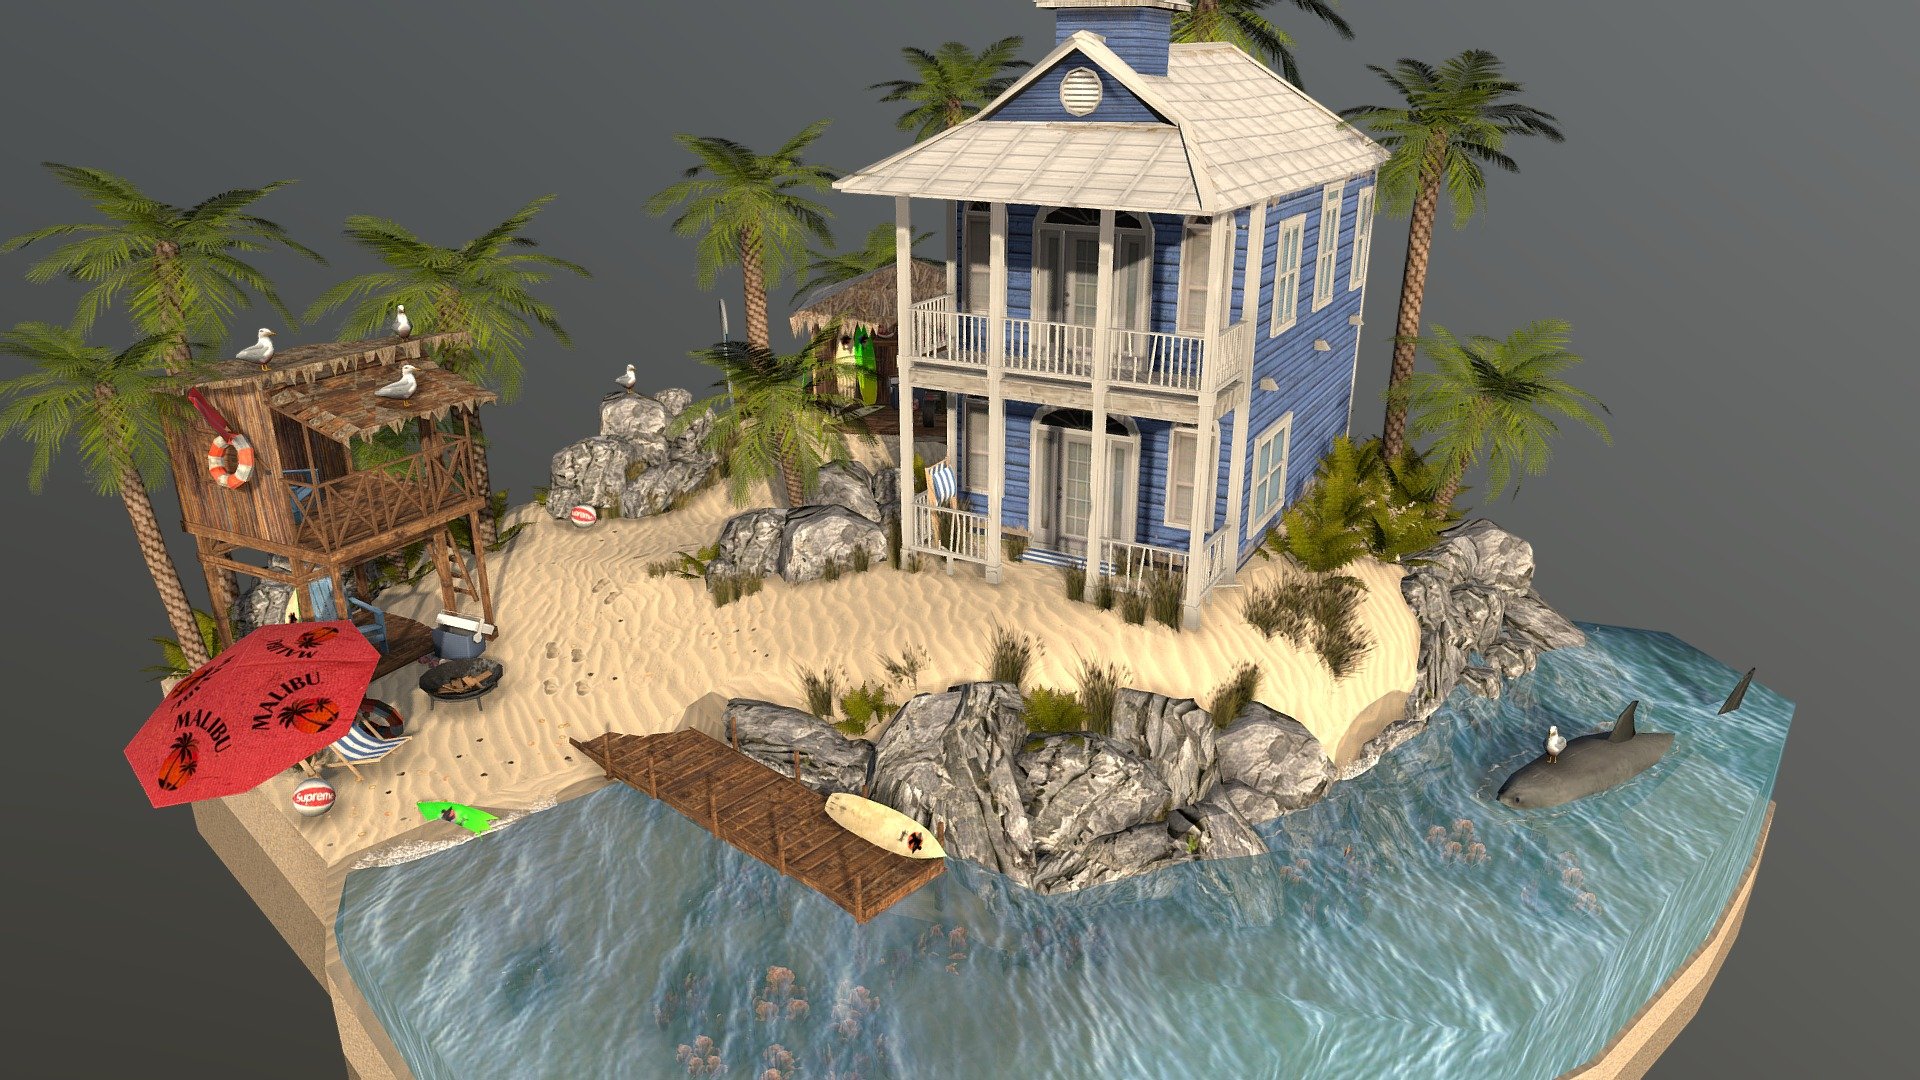 End exam for 3D1 at DAE.
I tried to work around the Idea of a group of surfer boys, spending their time in a surfer shack at the beach in florida. This was my first project in 3D software, since i had NO 3D experience at all before coming to DAE to learn, seeing my end project im quite happy with what I've achieved over such a short amount of time 3d model